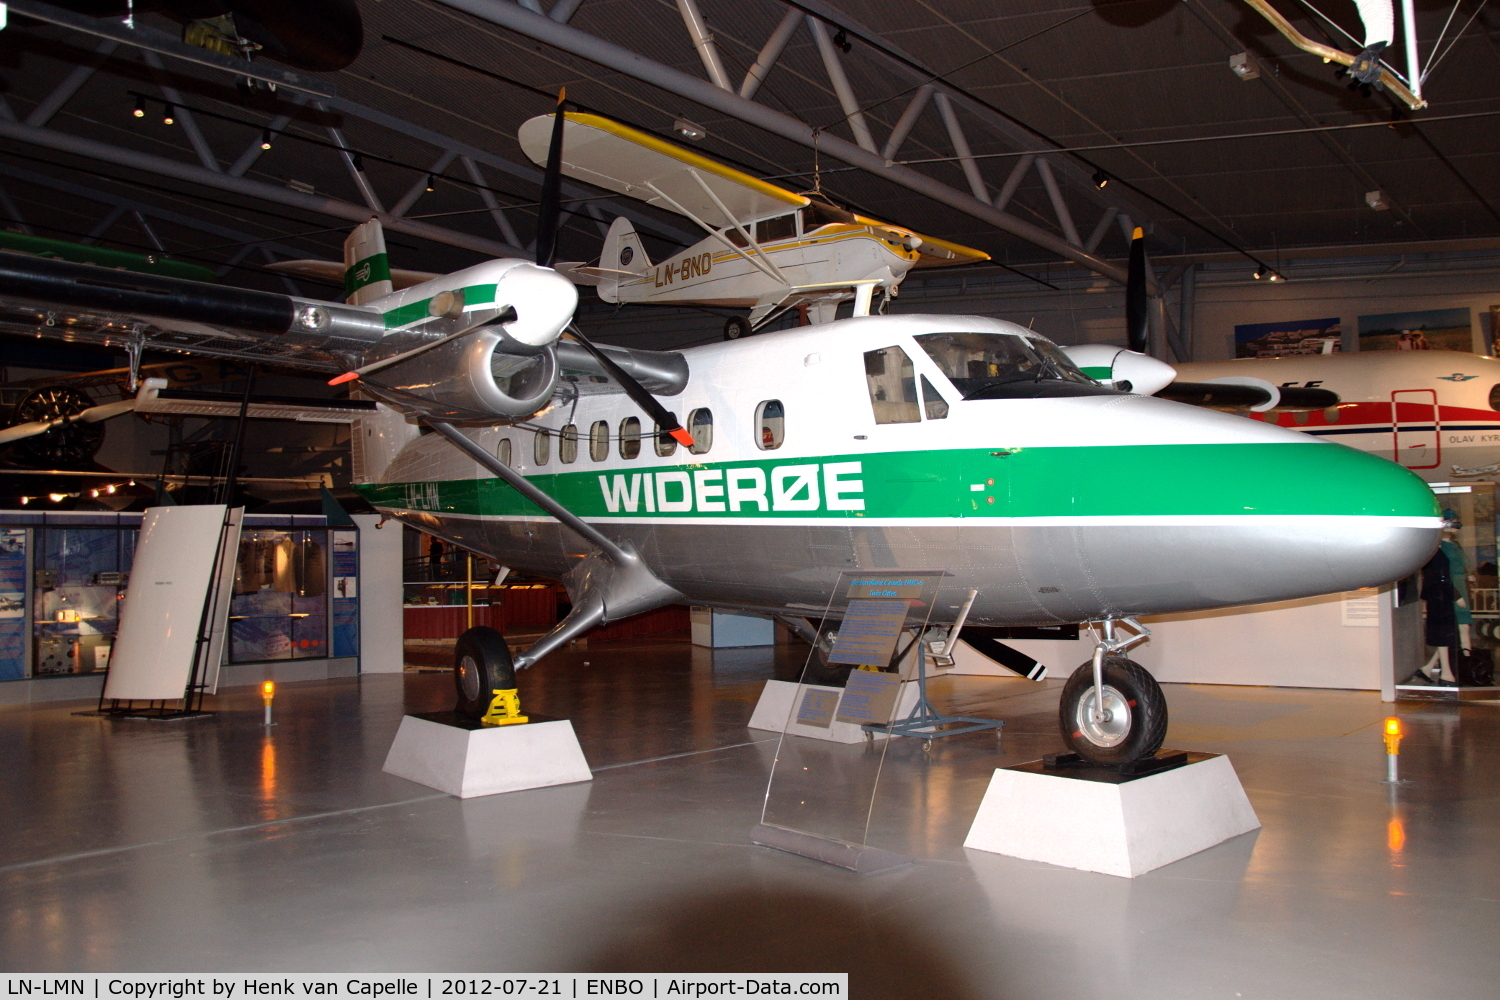 LN-LMN, 1968 De Havilland Canada DHC-6-200 Twin Otter C/N 127, Twin Otter in Widerøe colourscheme in the Norsk Luftfartsmuseum in Bodø, Norway. Widerøe operated this aircraft betwen 1968 and 1971.